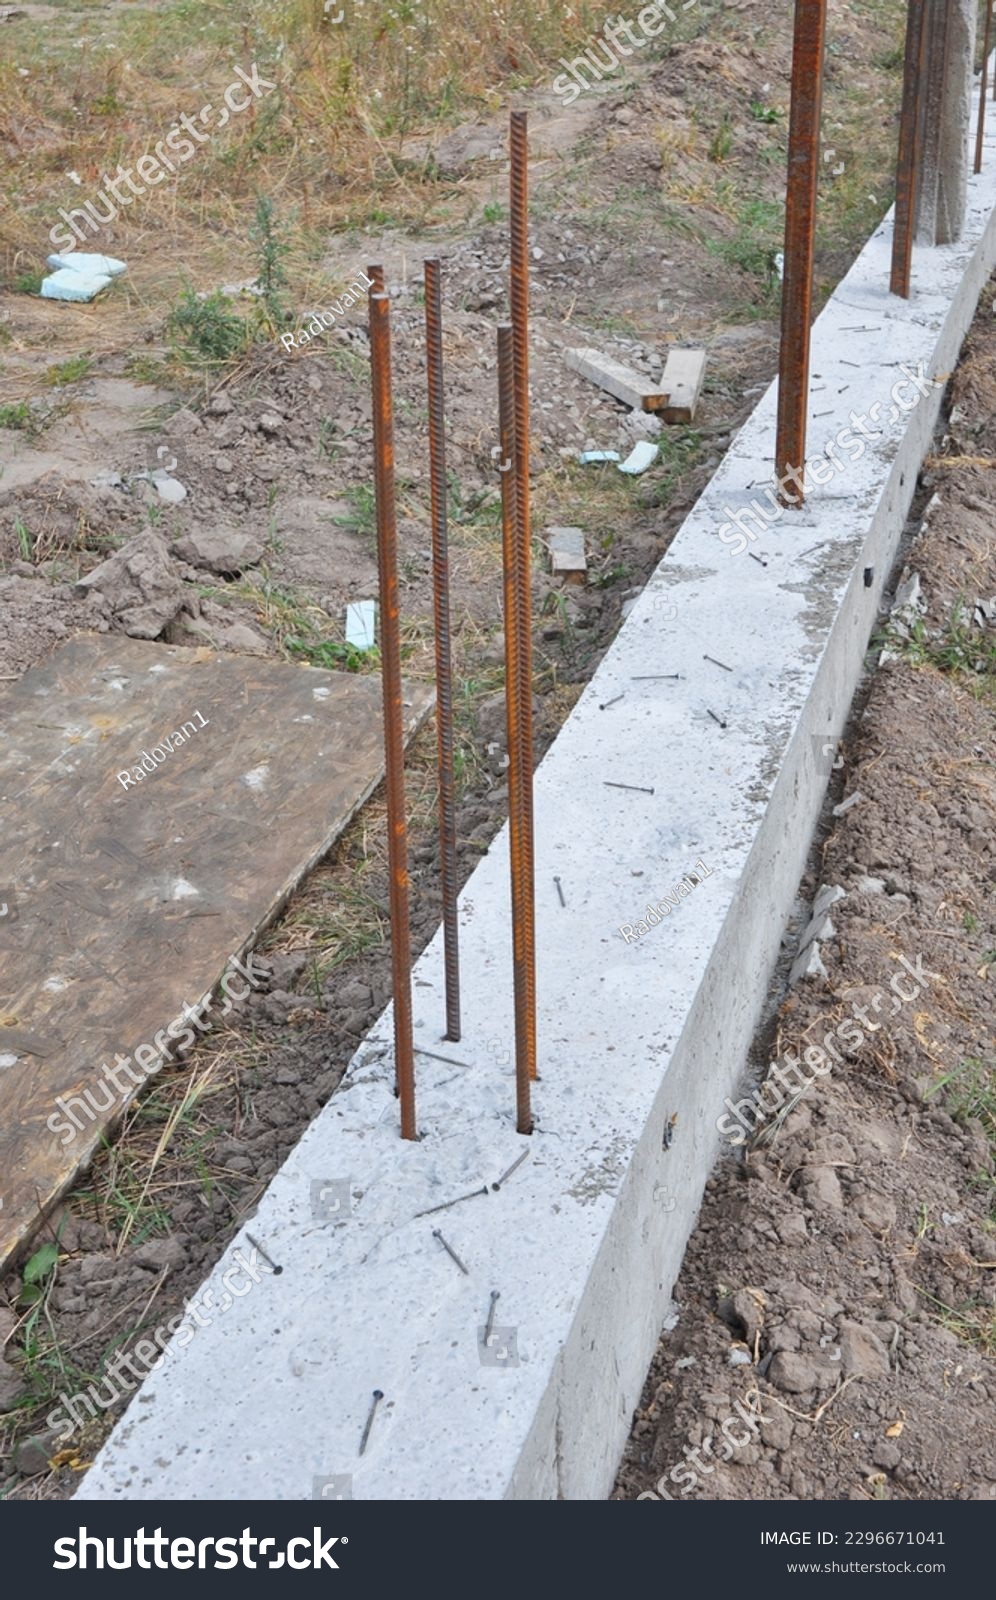 The concrete footer for new fence mounting. Fence footings. Close up on reinforced concrete footing for fence foundation with reinforcing bar. #2296671041